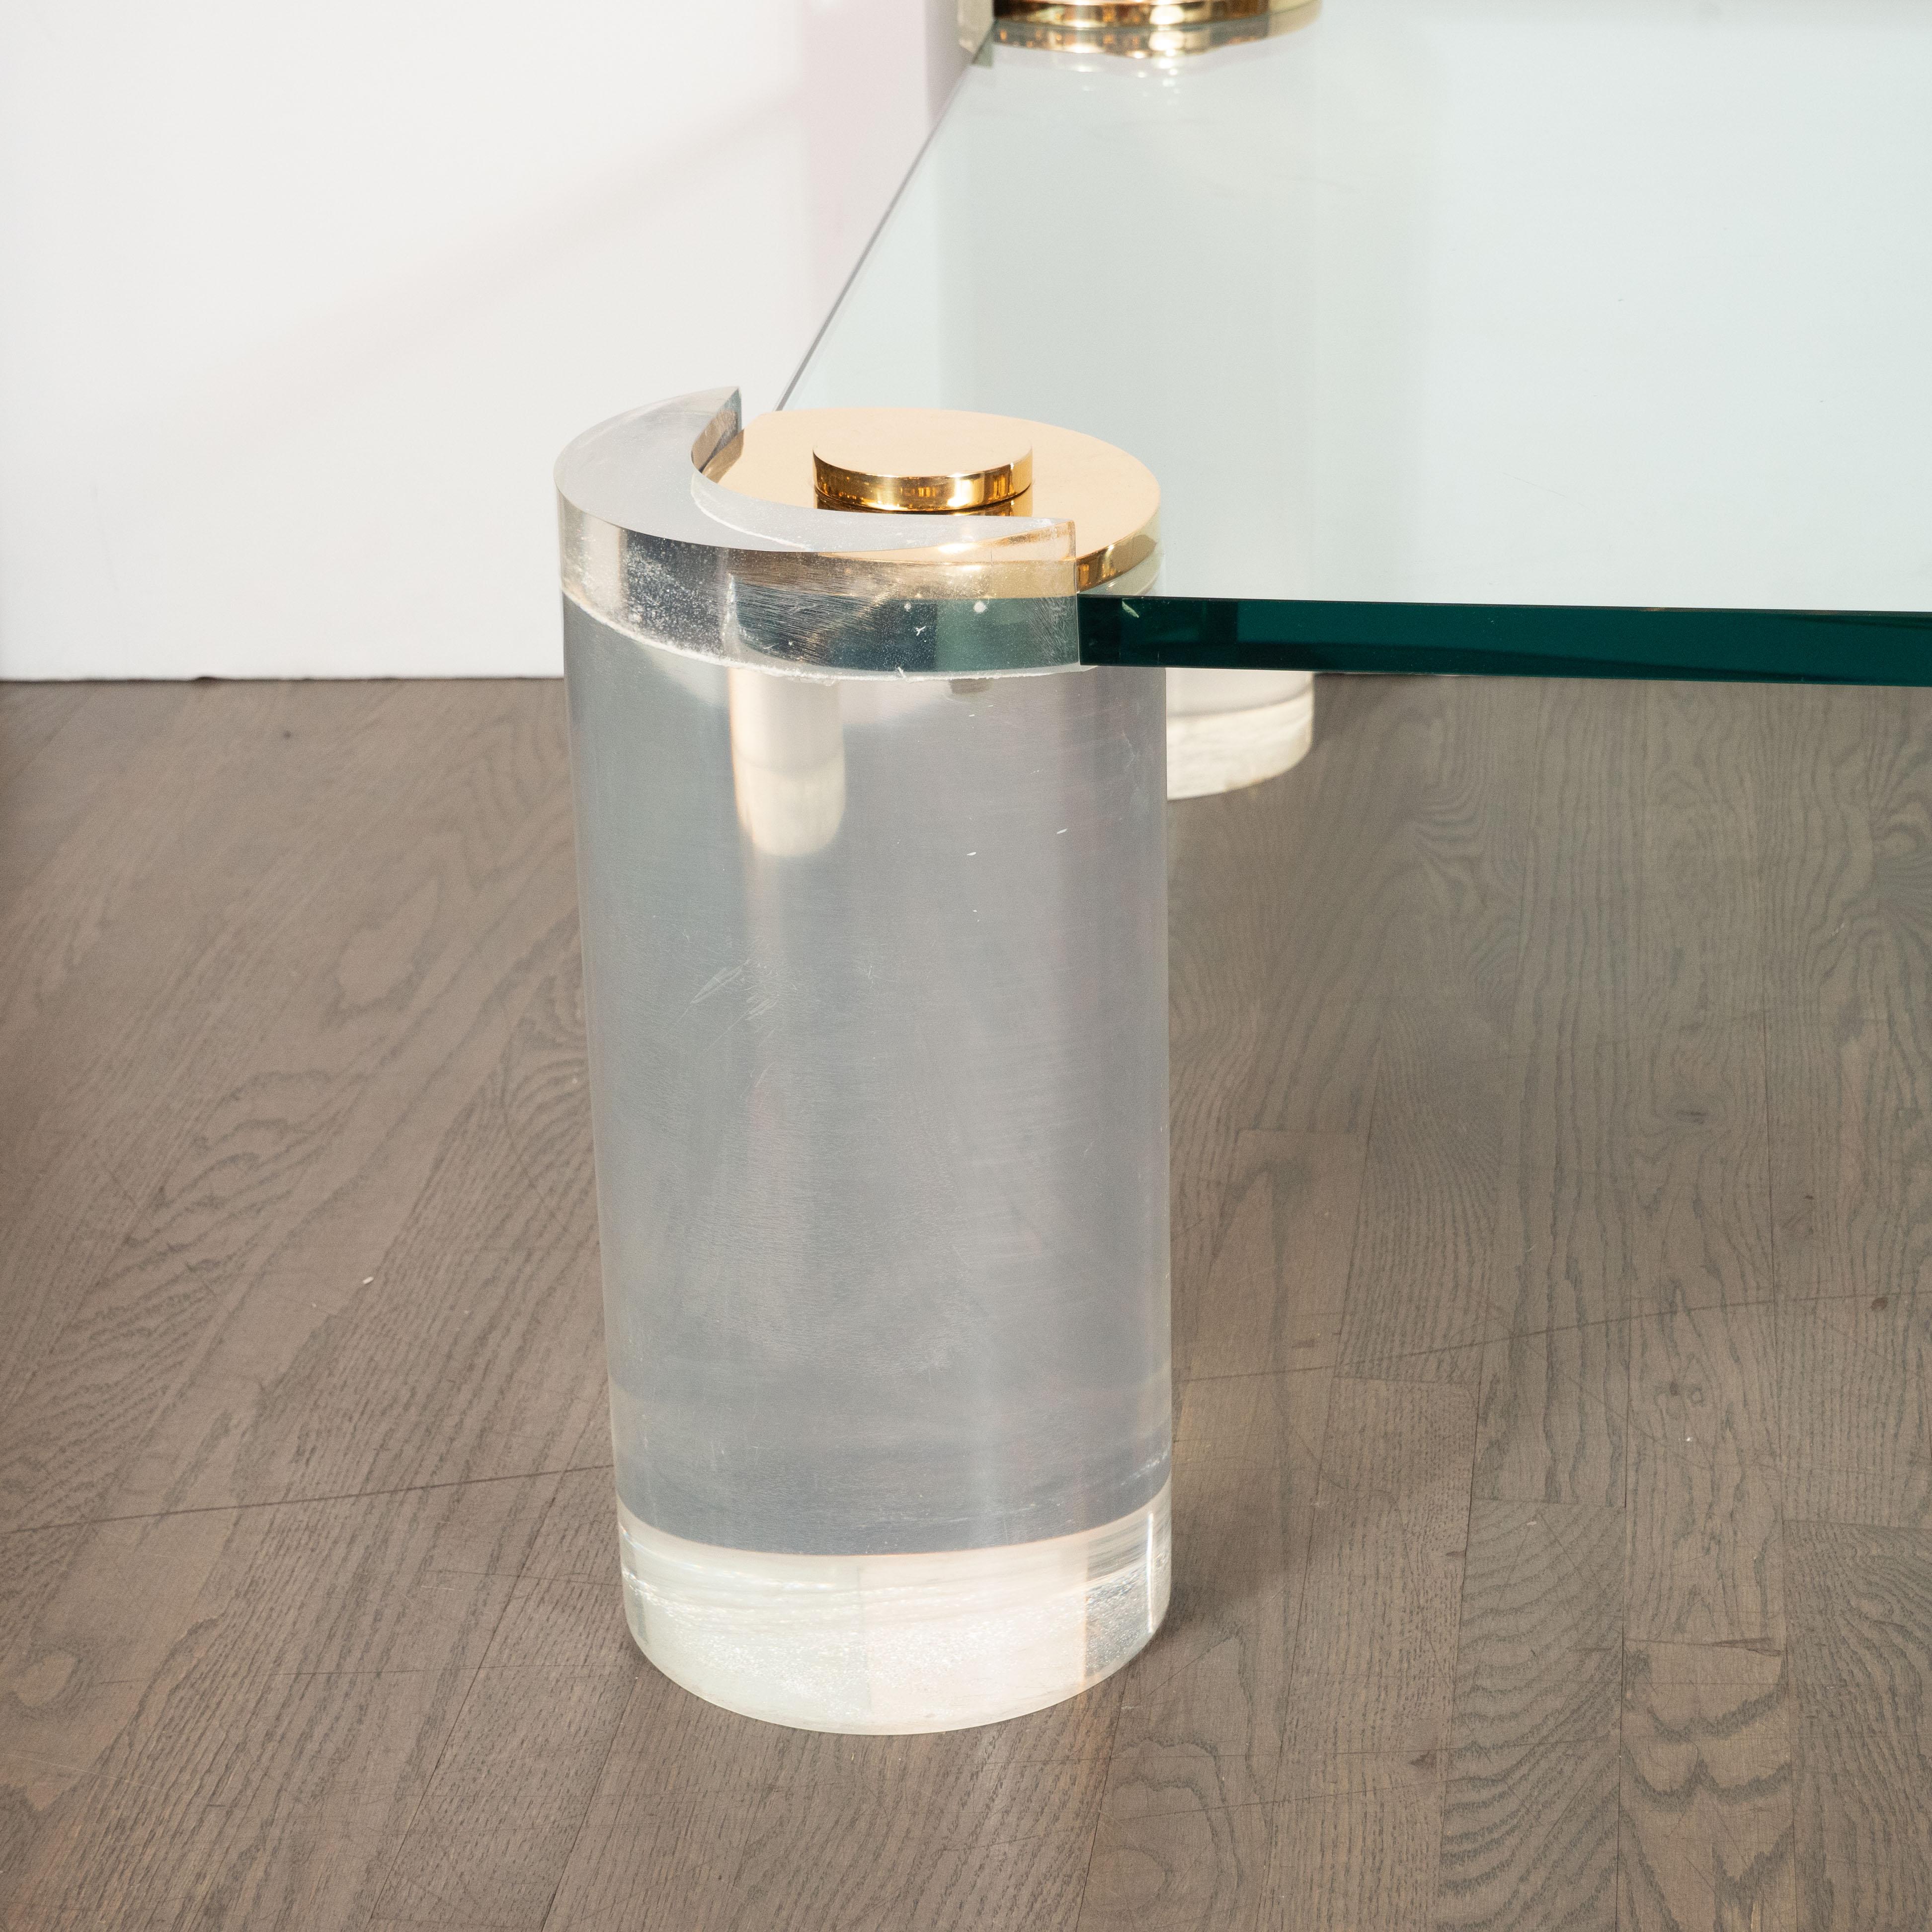 This sophisticated cocktail table was realized by Karl Springer- one of the most important and influential designers of the 20th century, circa 1985. It features cylindrical Lucite legs that attach to a rectangular glass top with rounded corners via